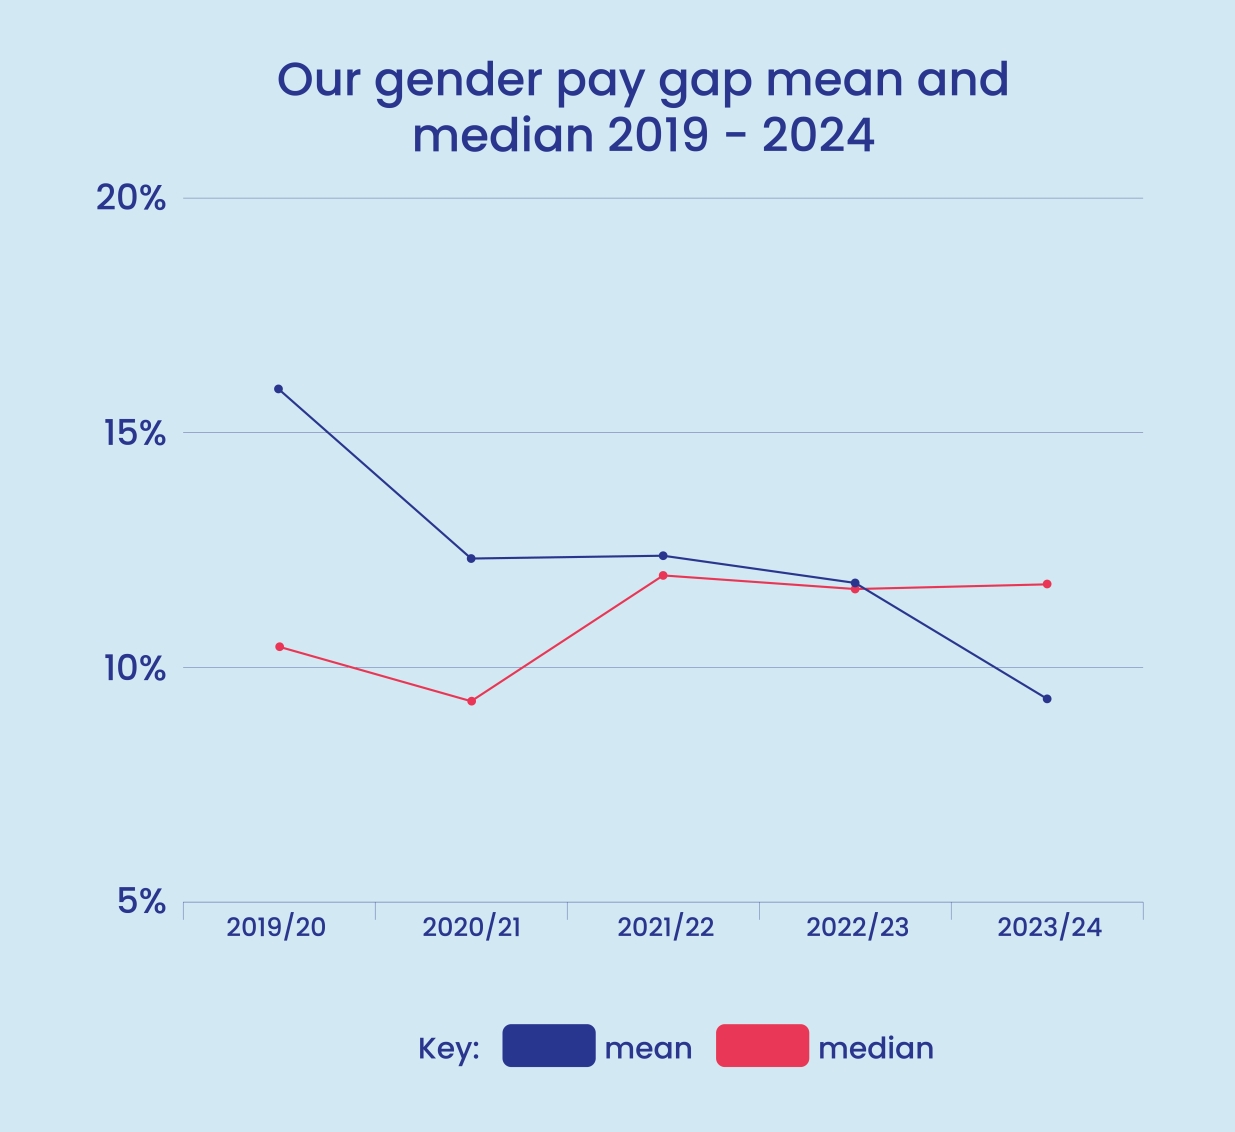 LiveWest gender pay gap median and mean 2019 to 2024